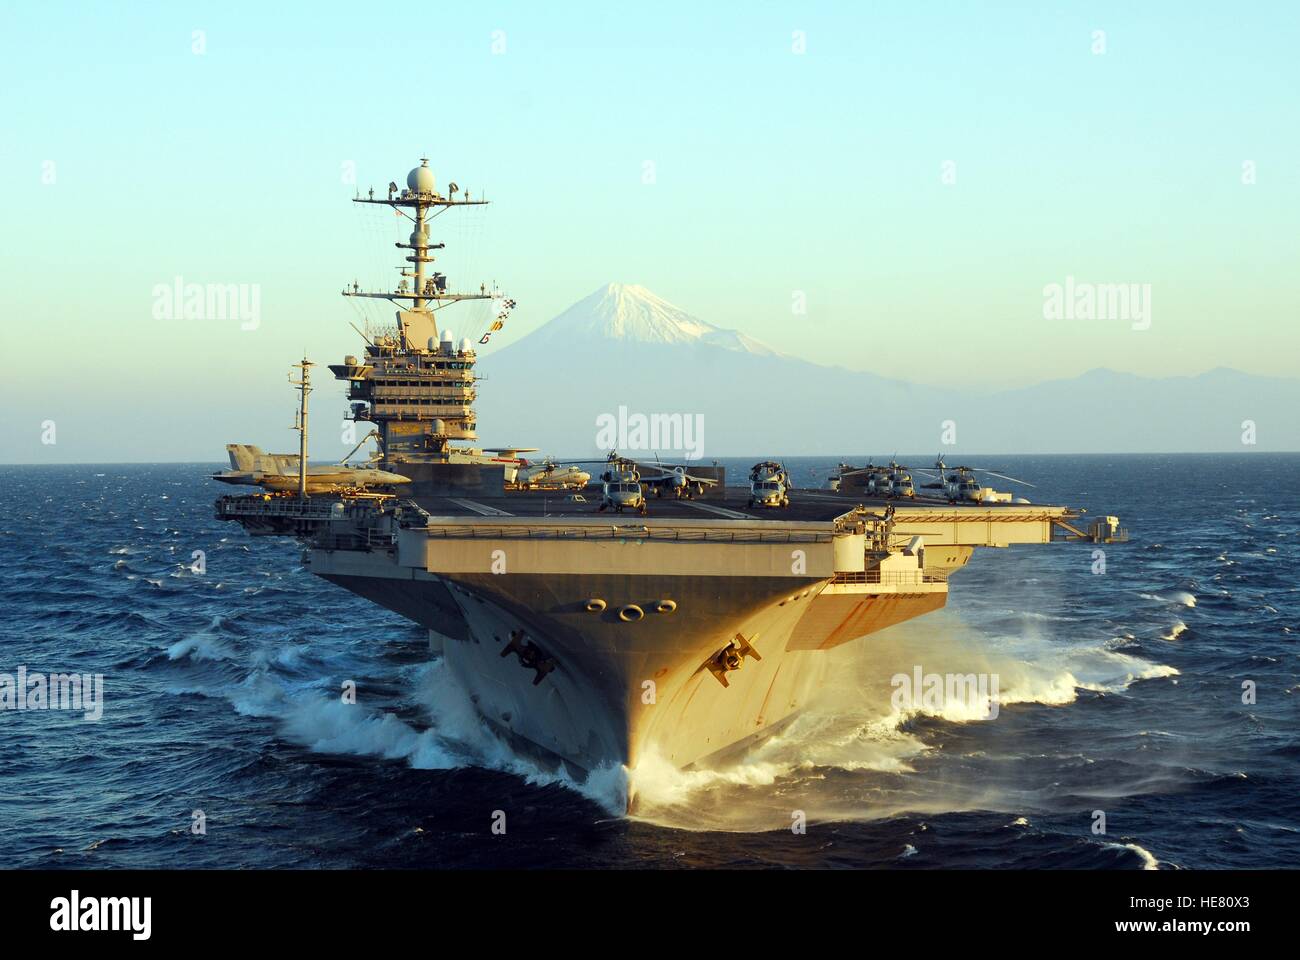 The USN Nimitz-class aircraft carrier USS George Washington steams underway with the Mt. Fuji range in the background November 21, 2009 in the Pacific Ocean. Stock Photo